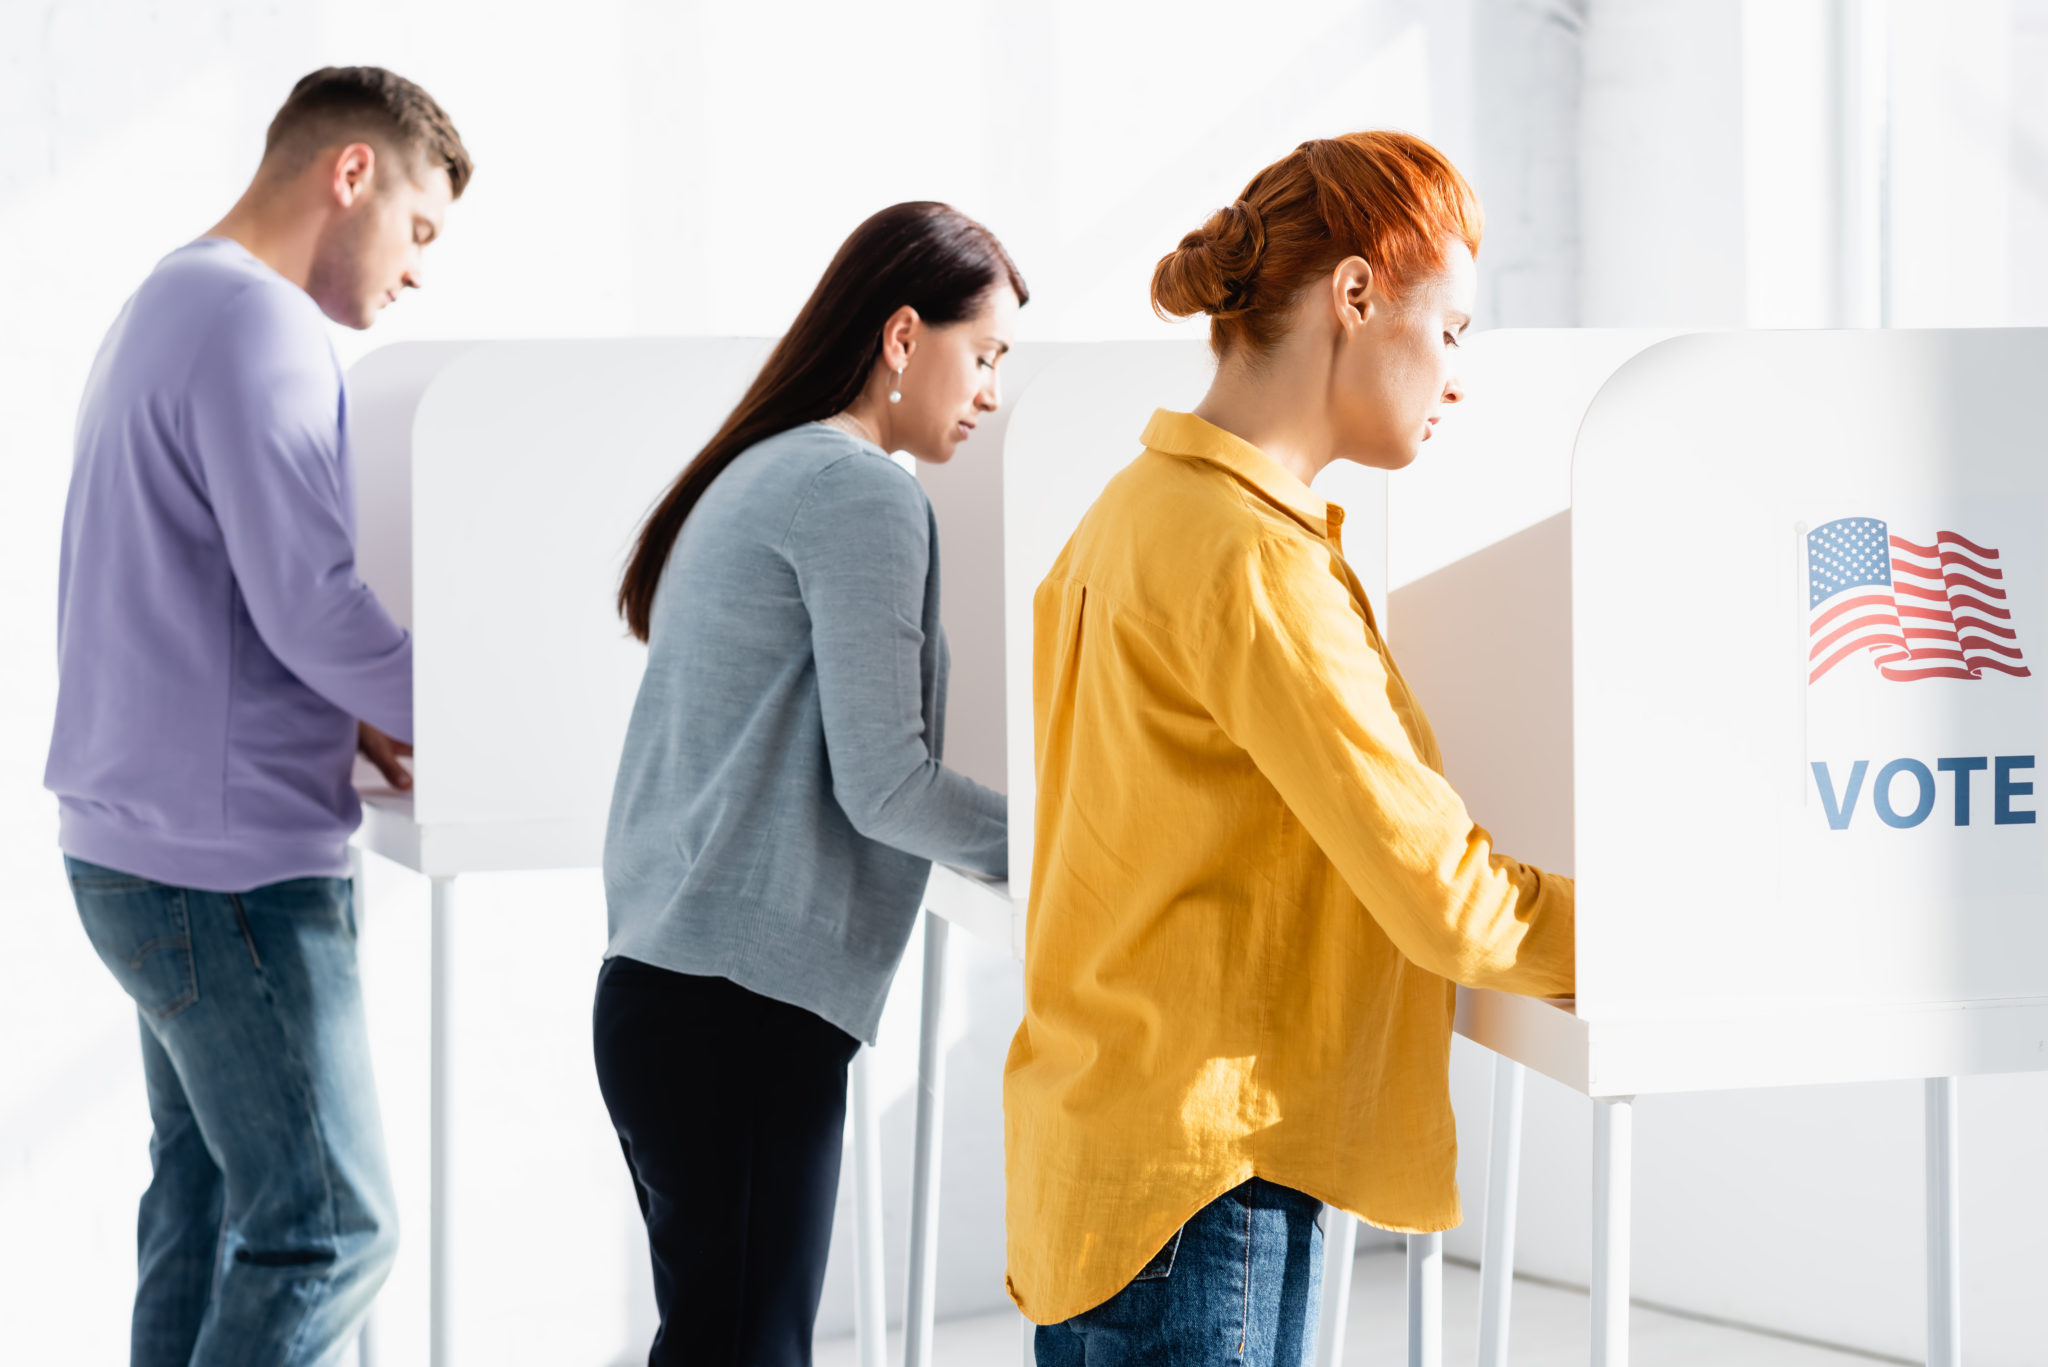 voters in polling booths with american flag and vote lettering on blurred background